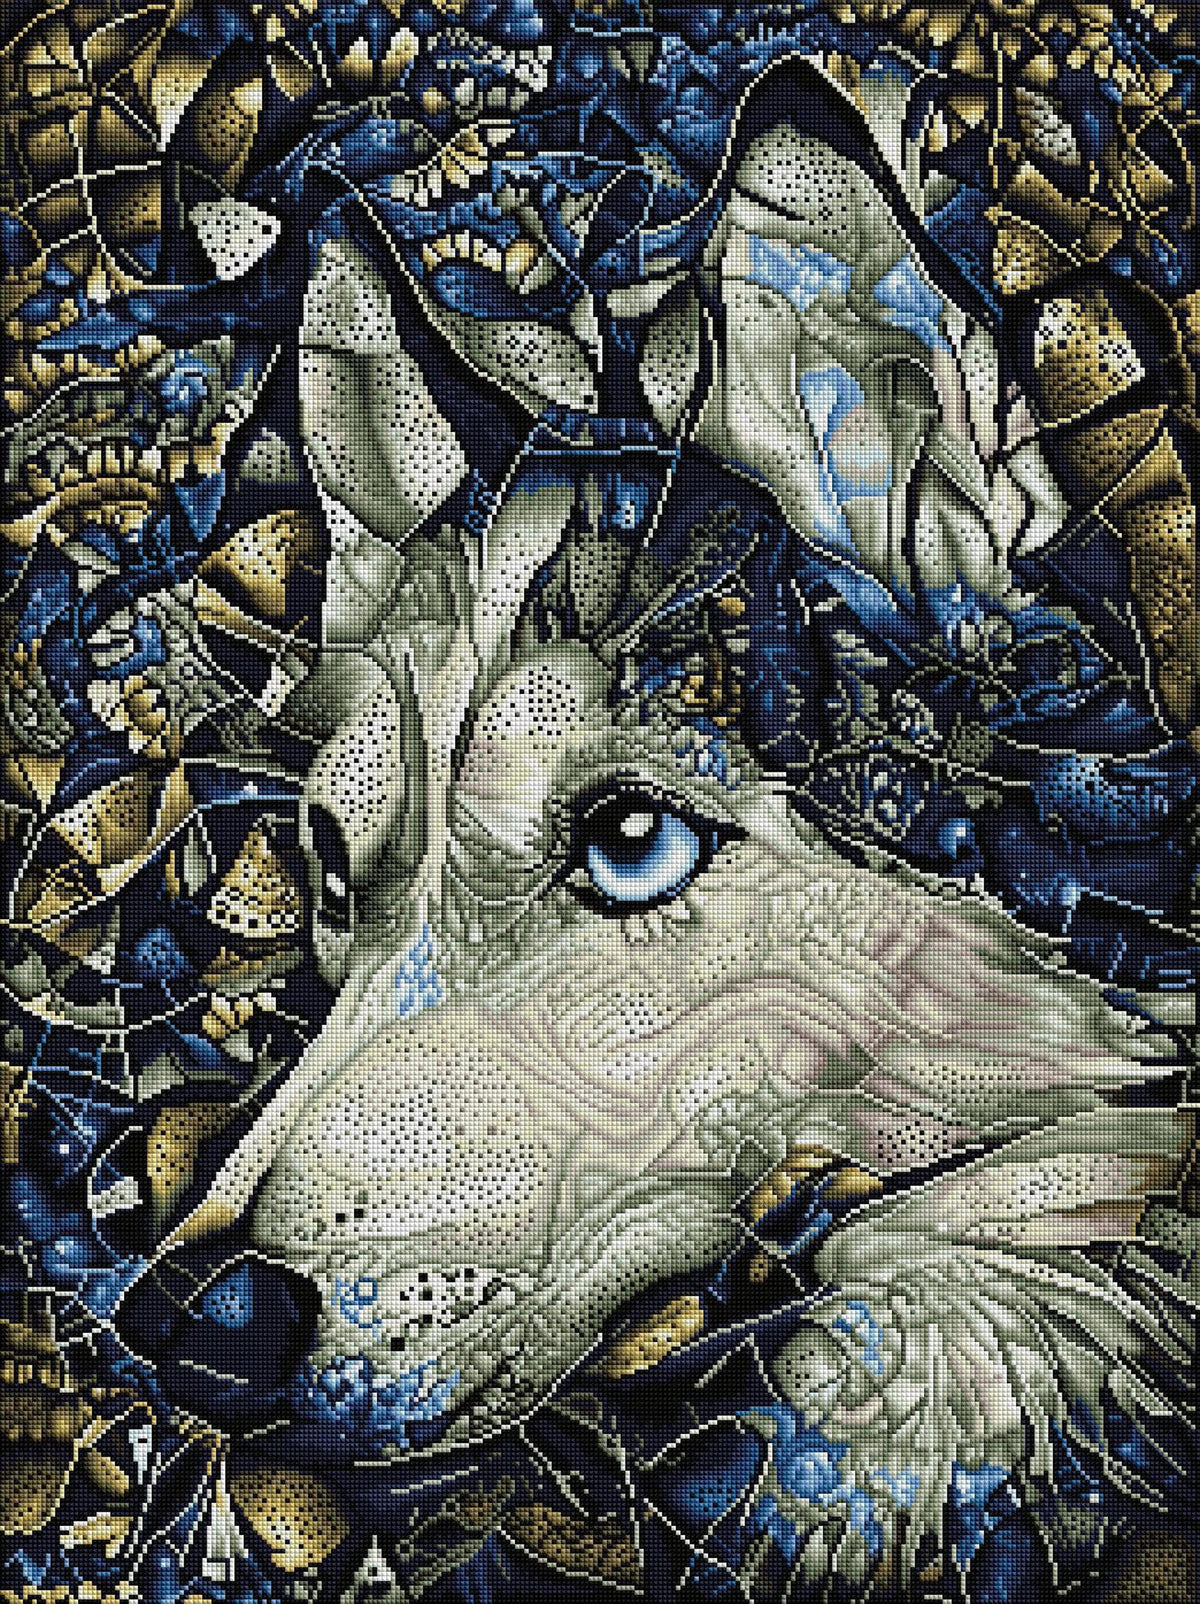 Diamond Painting Silver Husky Dog 25.6" x 34.3" (65cm x 87cm) / Square with 29 Colors including 2 ABs / 91,089